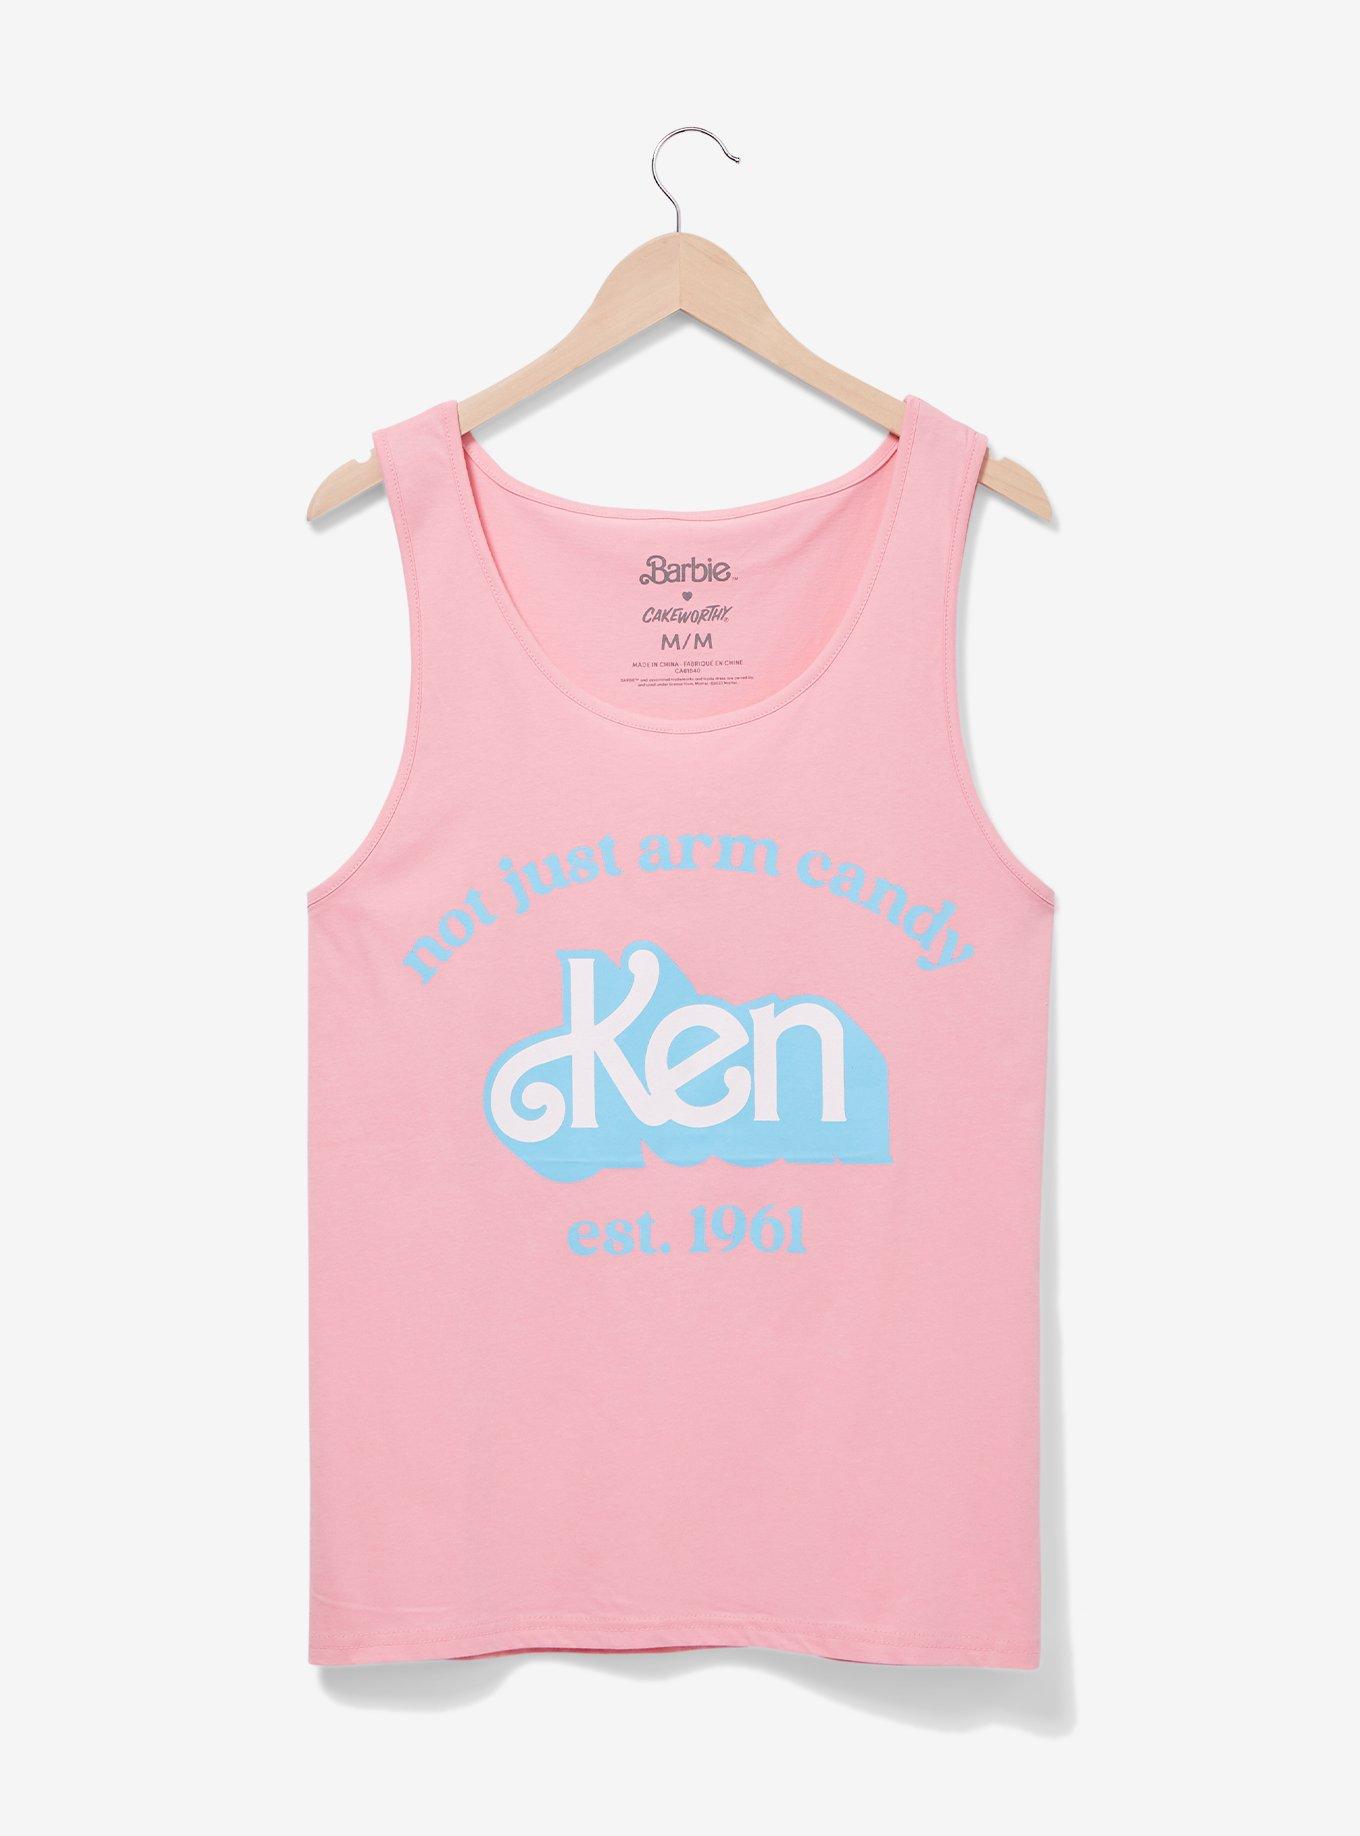 Barbie Ken Not Just Arm BoxLunch | Exclusive Candy Tank Top - BoxLunch